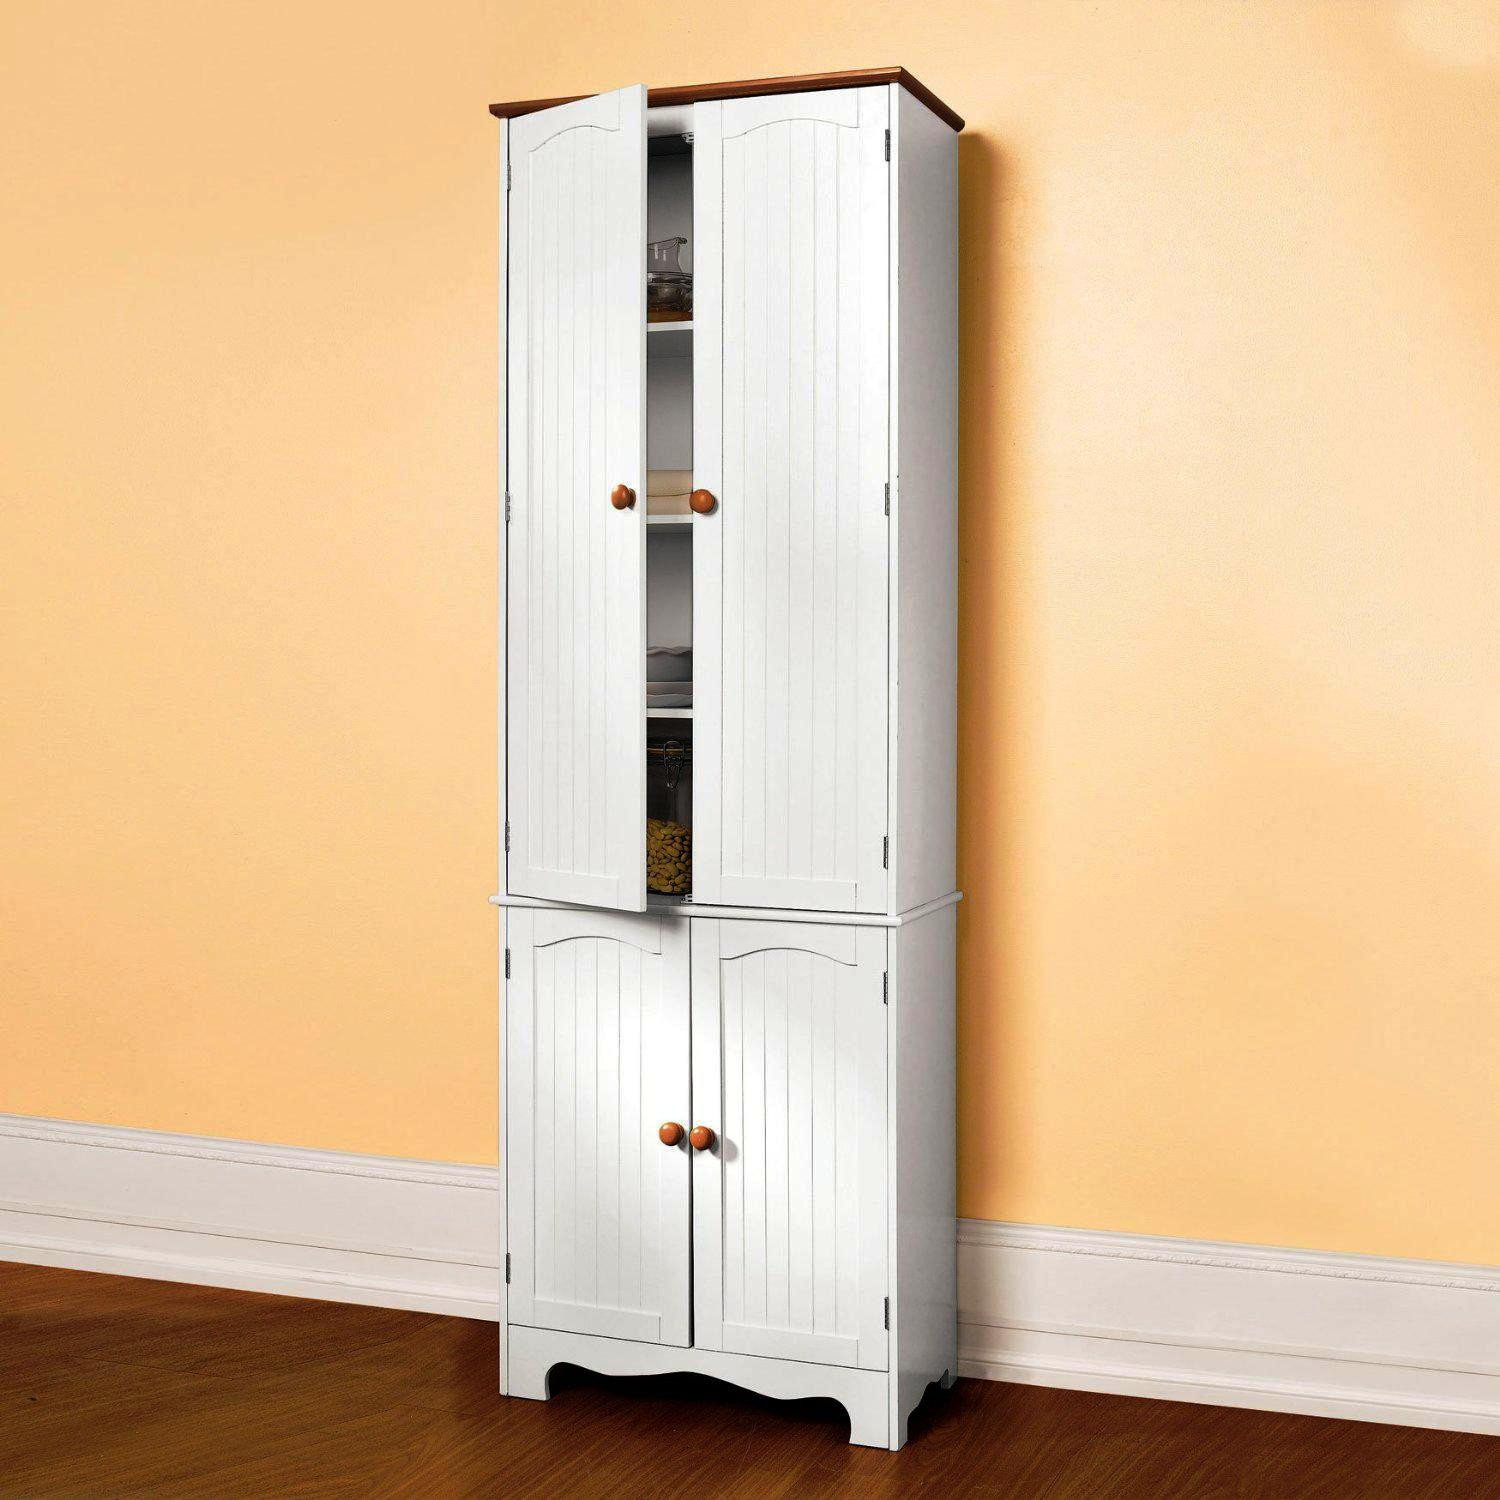 Lowes Kitchen Storage Cabinets
 Lowes Freestanding Pantry Cabinet